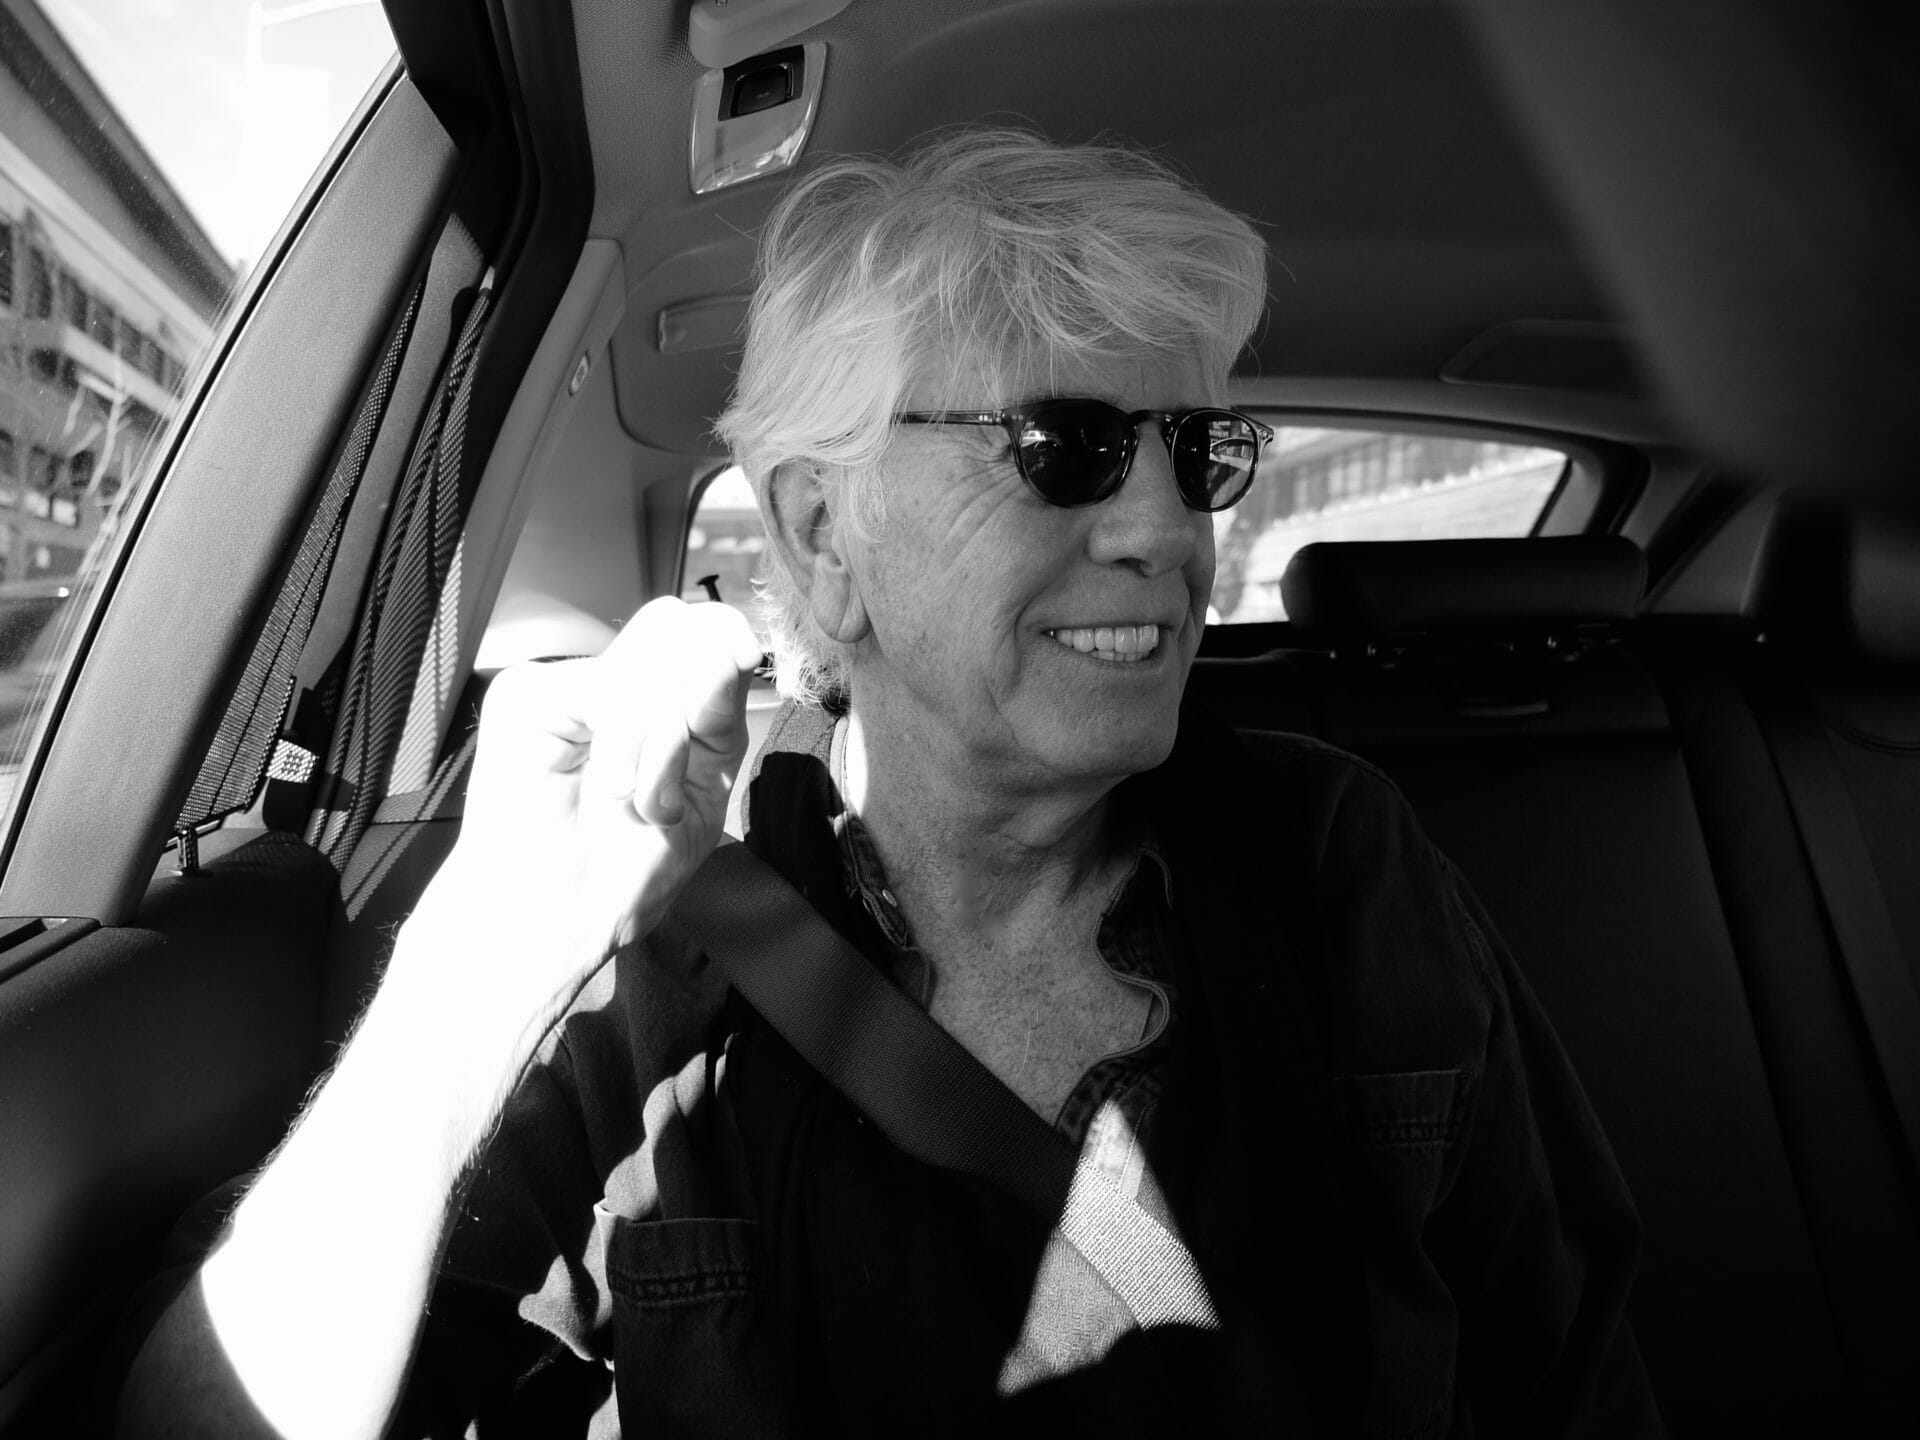 A Life in Focus: The Photography of Graham Nash